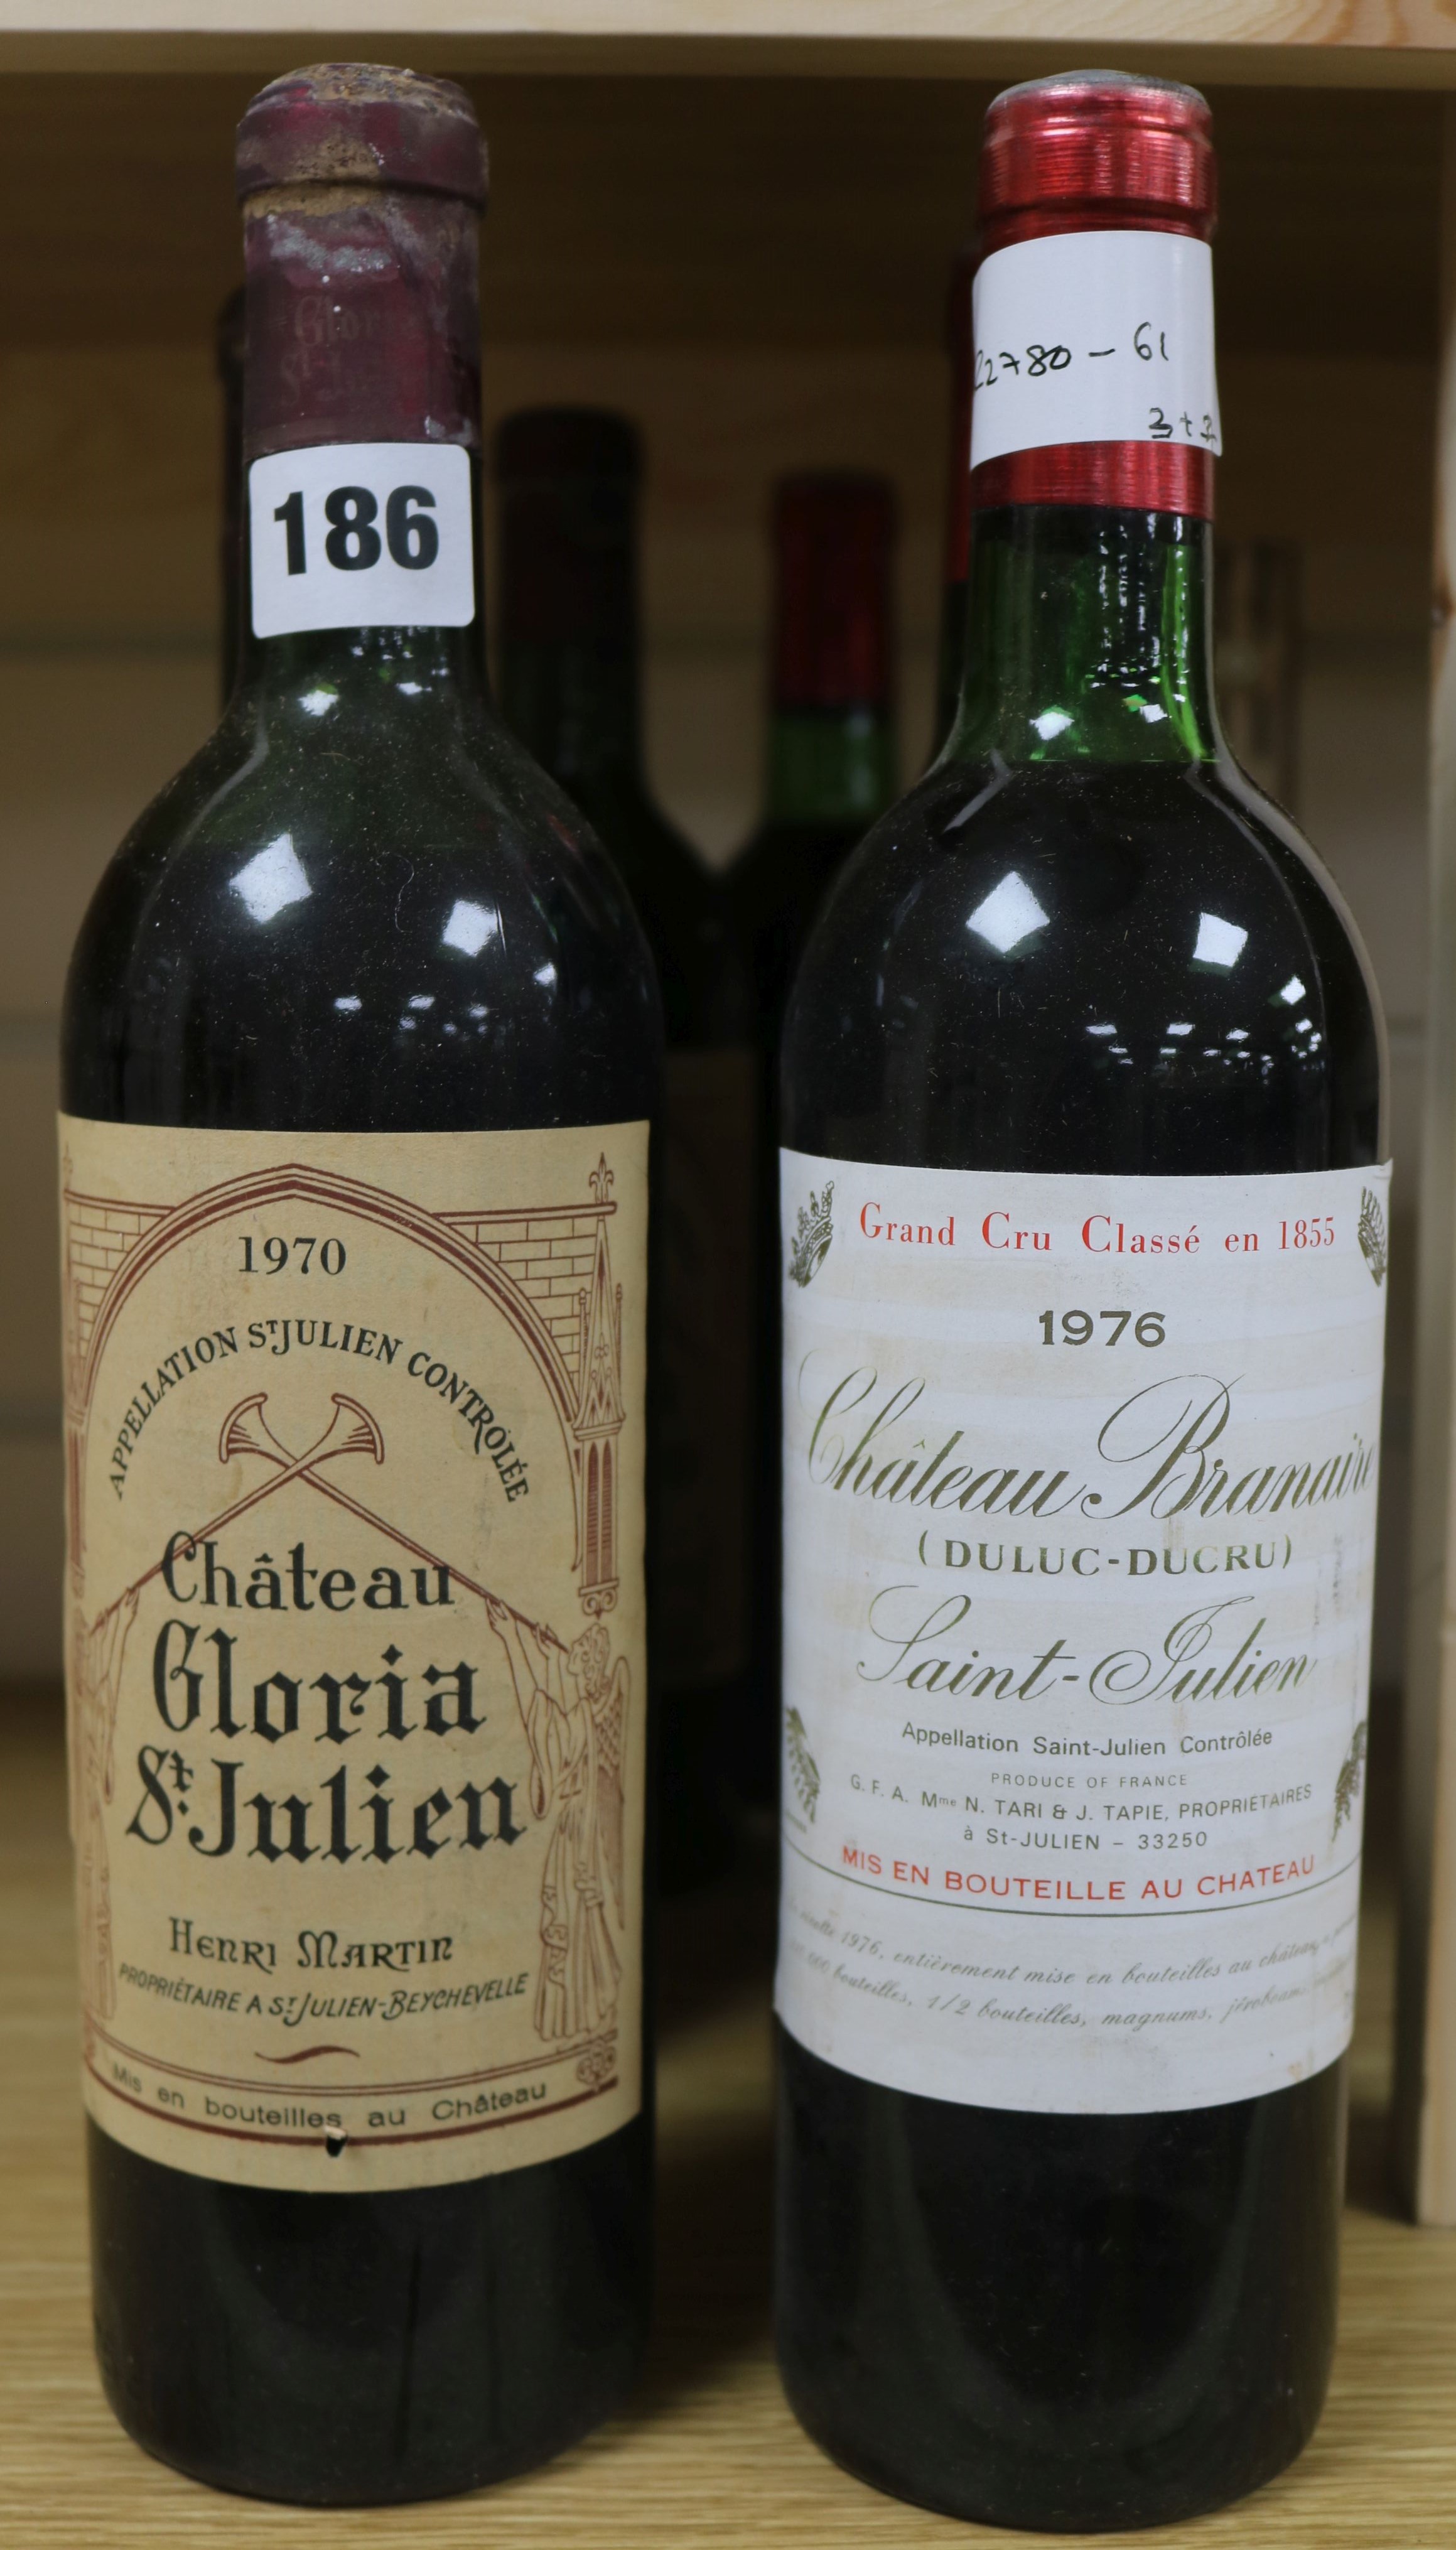 Three bottles of Chateau Gloria St Julien 1970 and four bottles of Chateau Branaire 1976